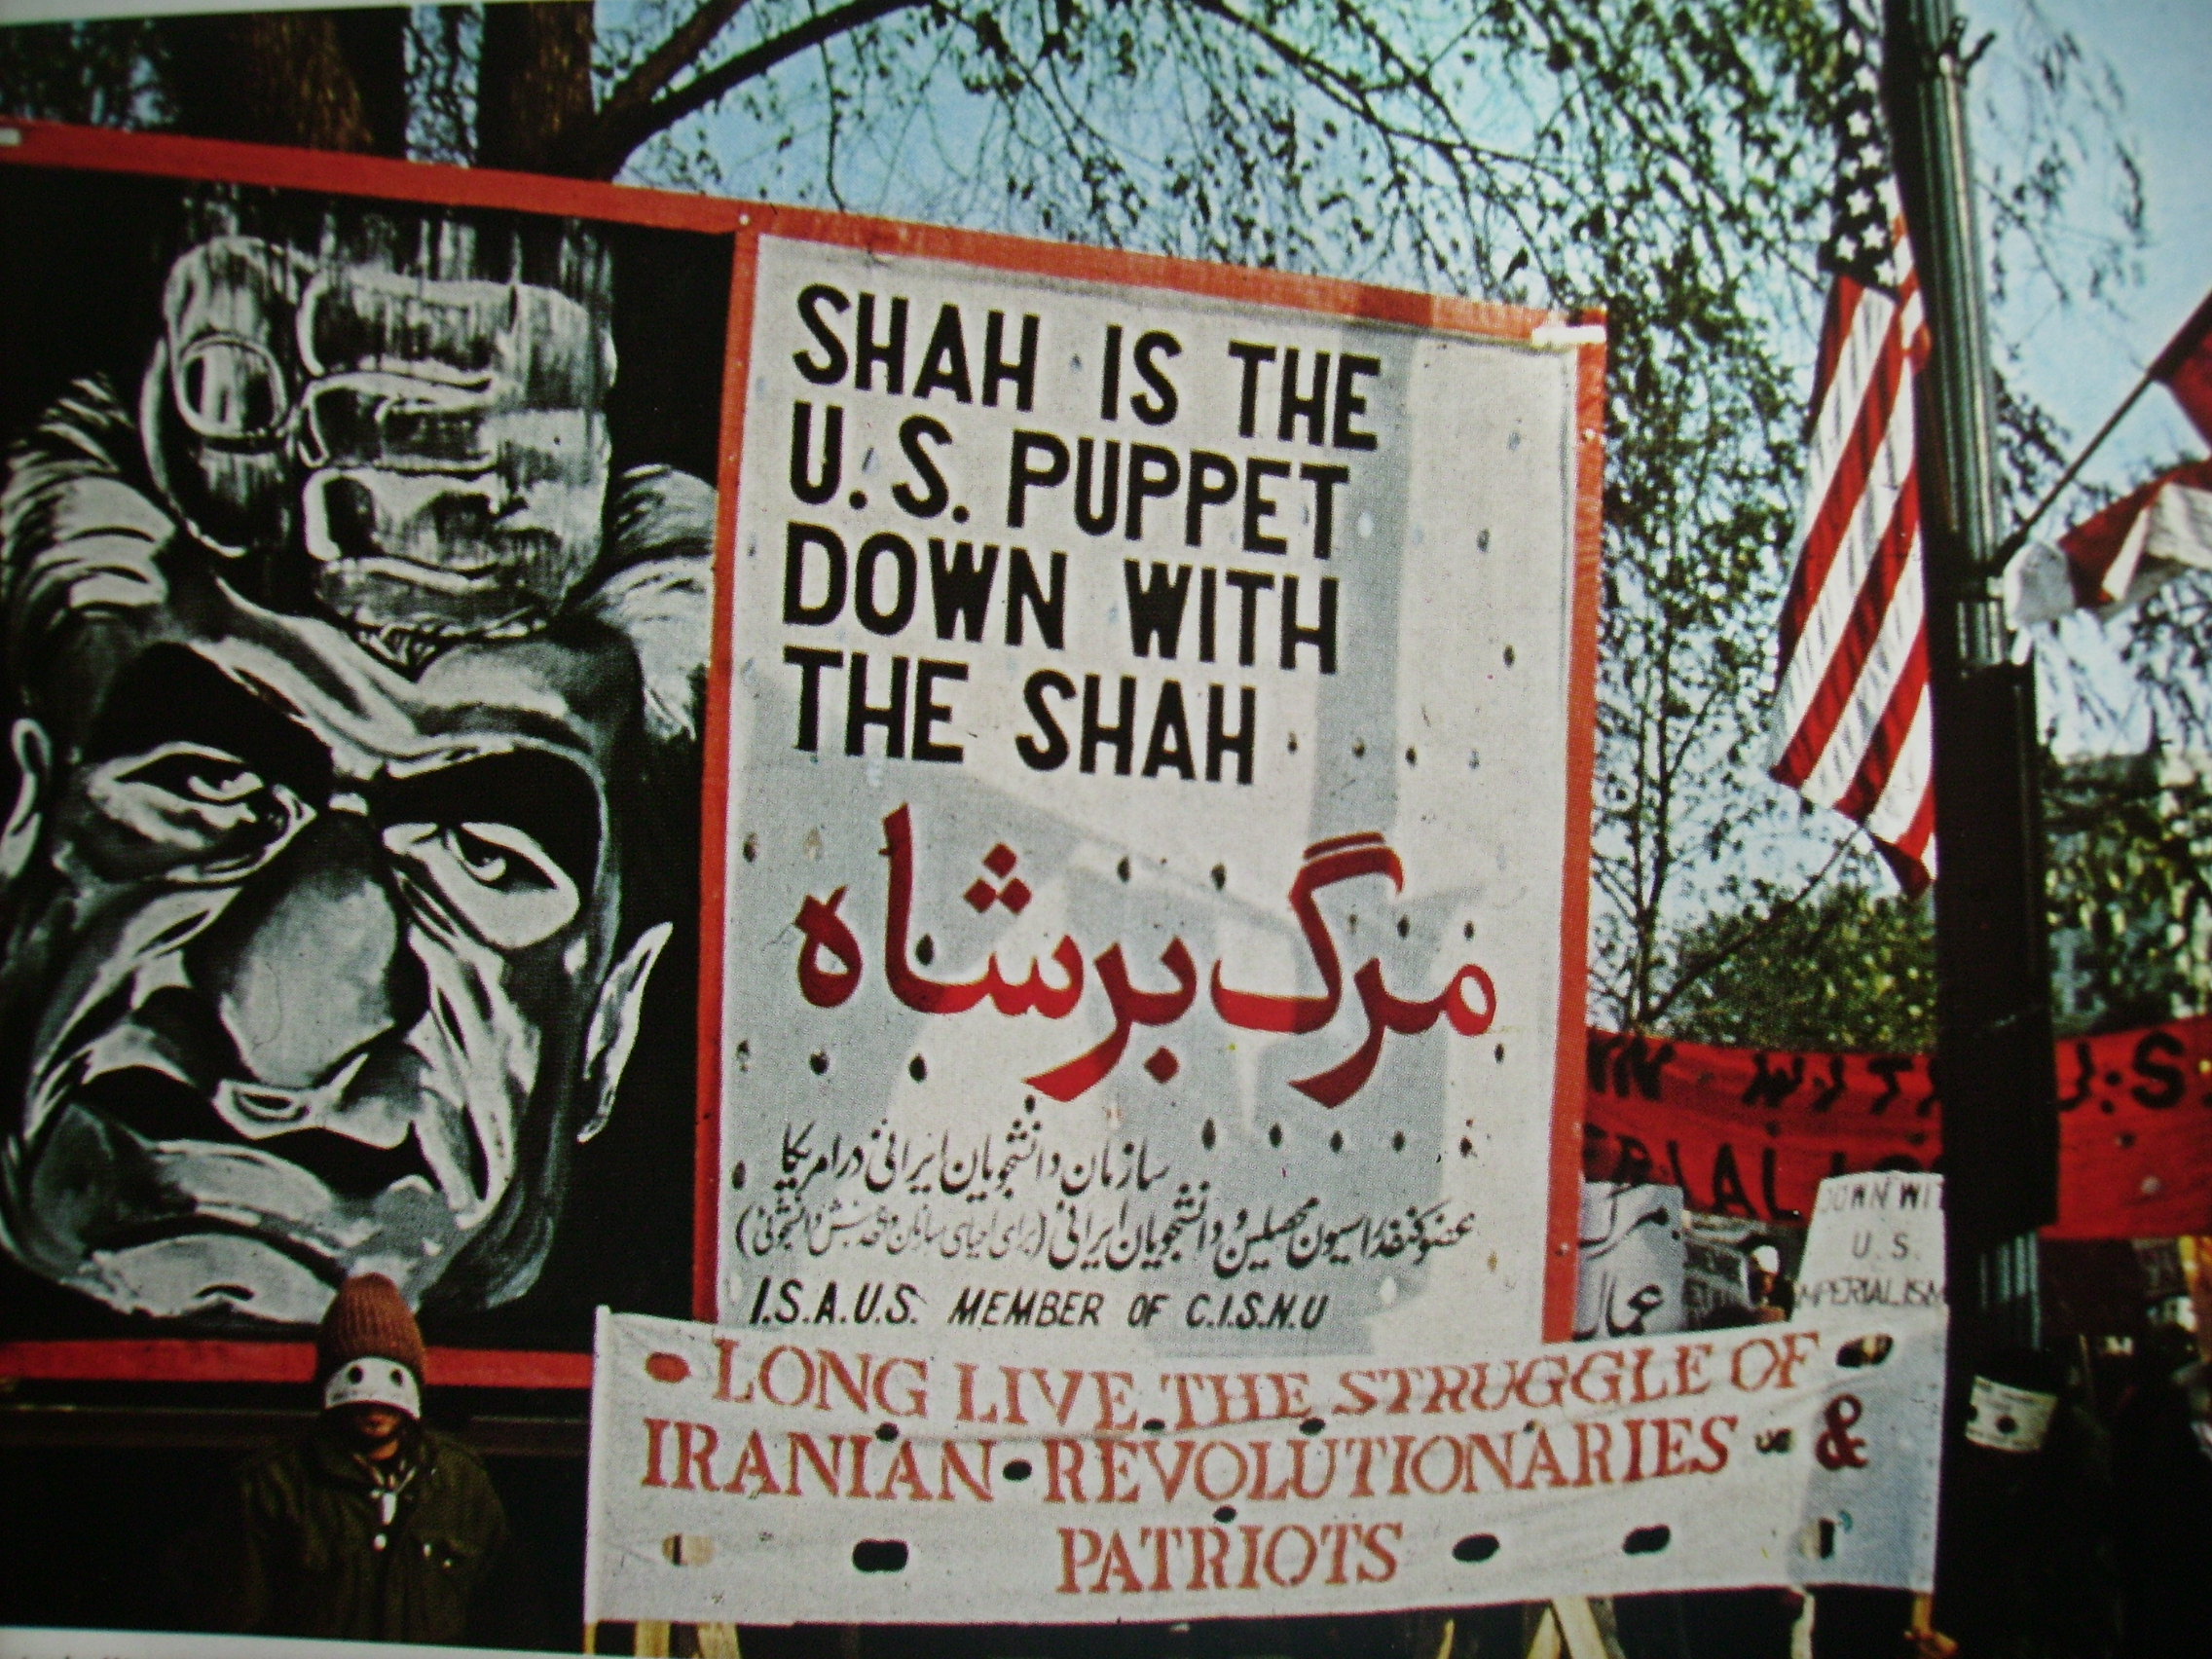 Banners criticizing the shah, during the 1979 Iranian Revolution